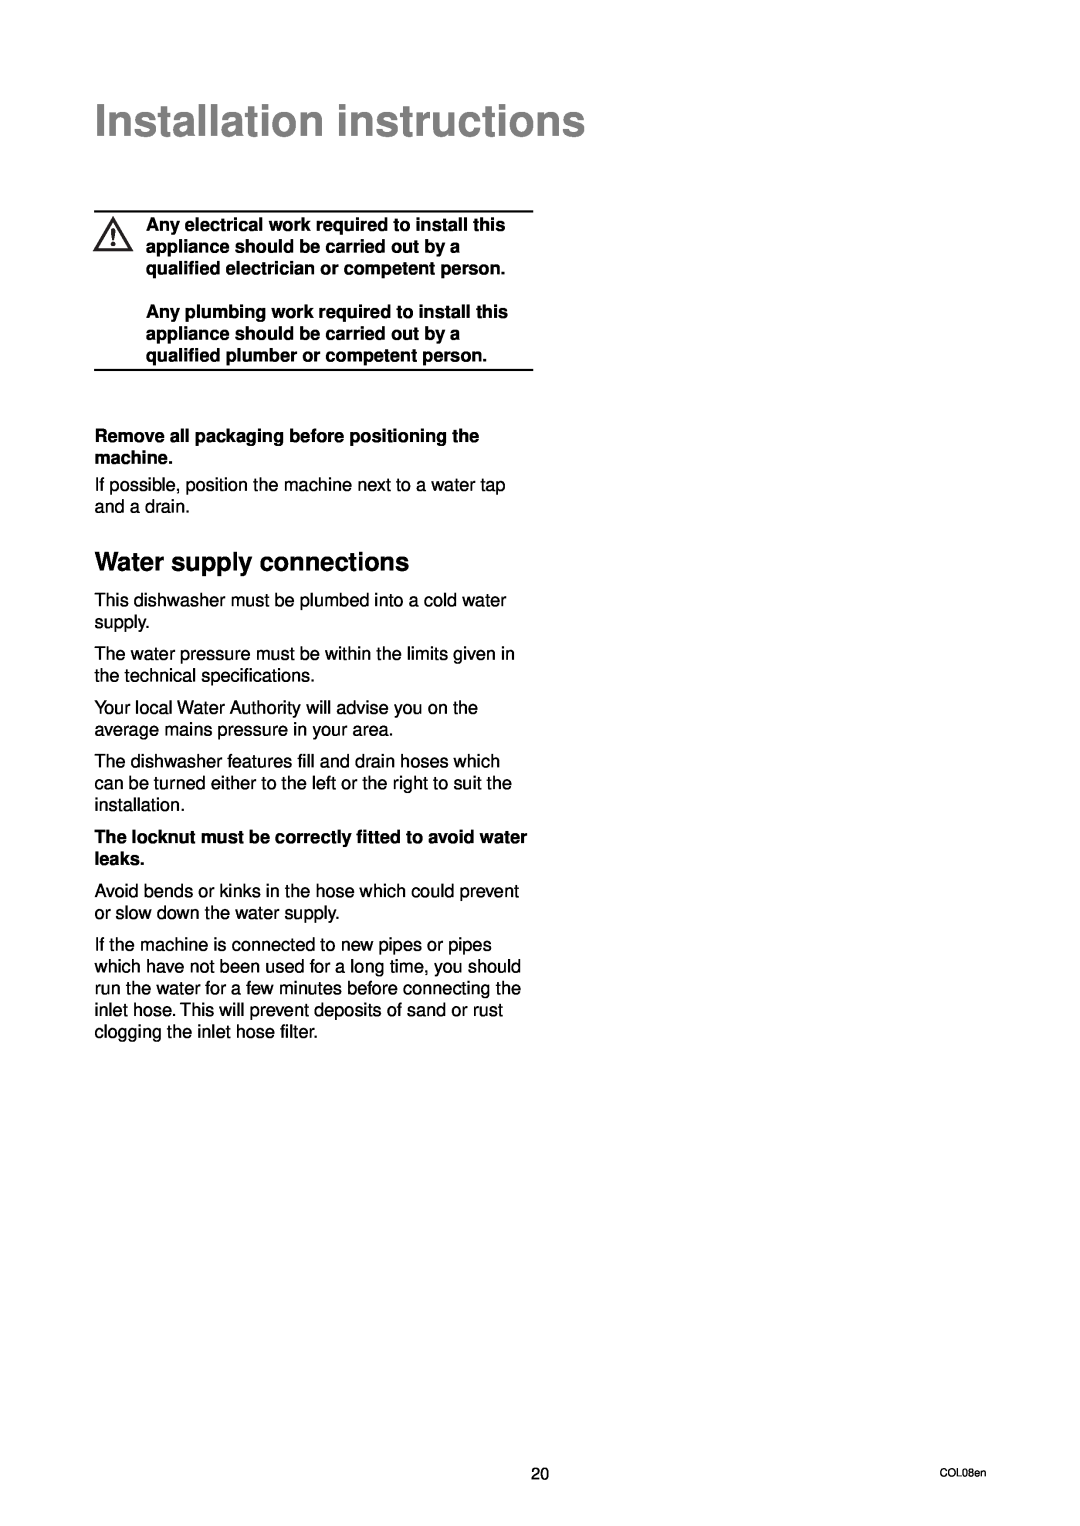 Zanussi DWS 949 manual Installation instructions, Water supply connections 